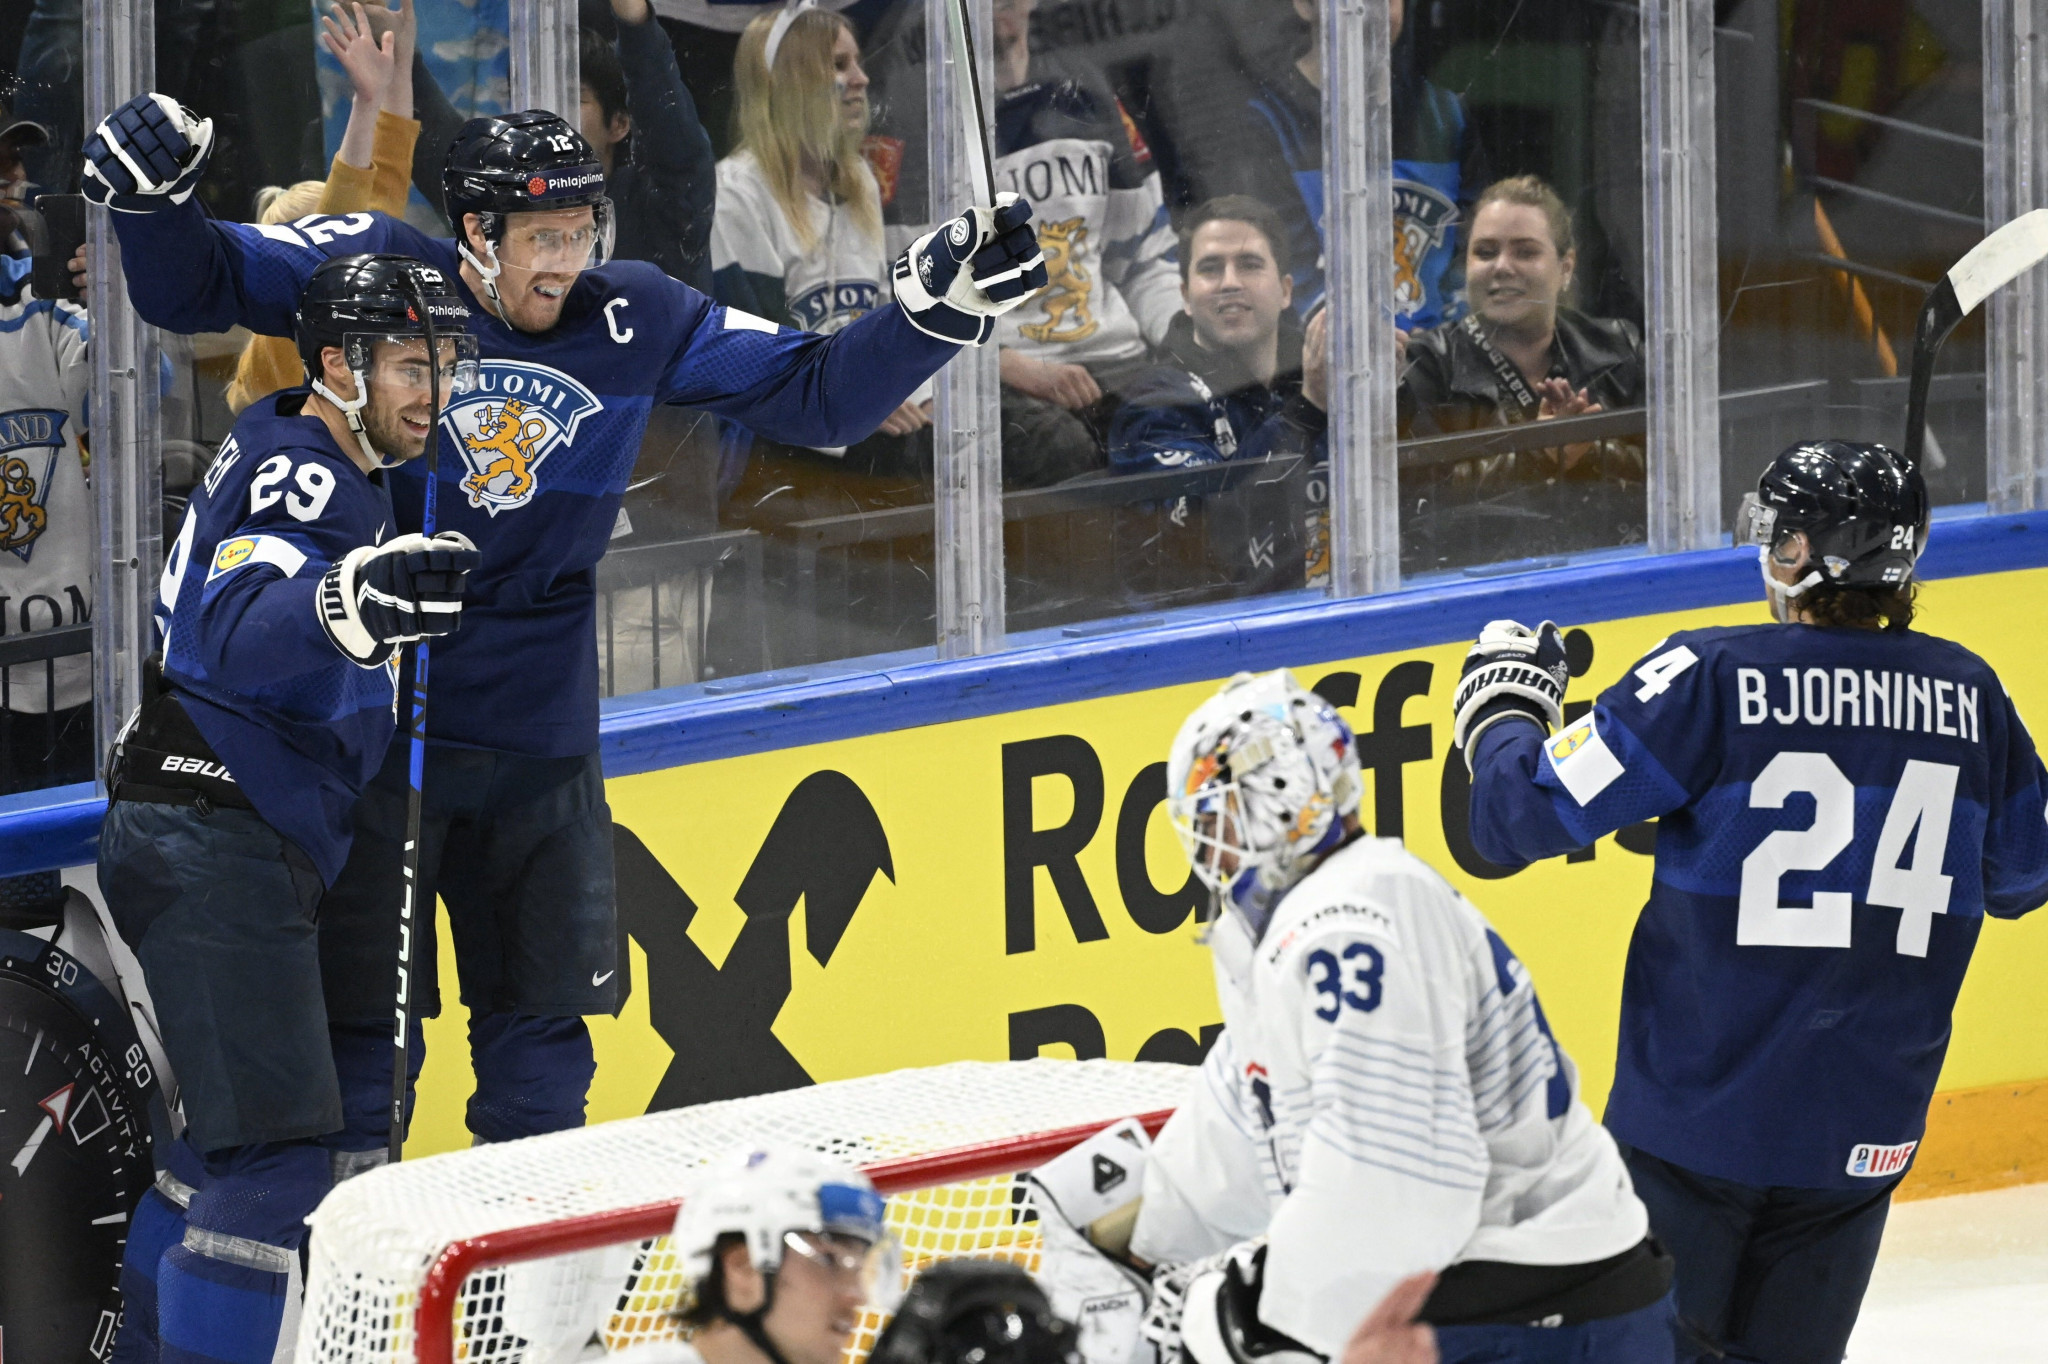 Finland overcame France in an eight-goal thriller in Tampere ©Getty Images